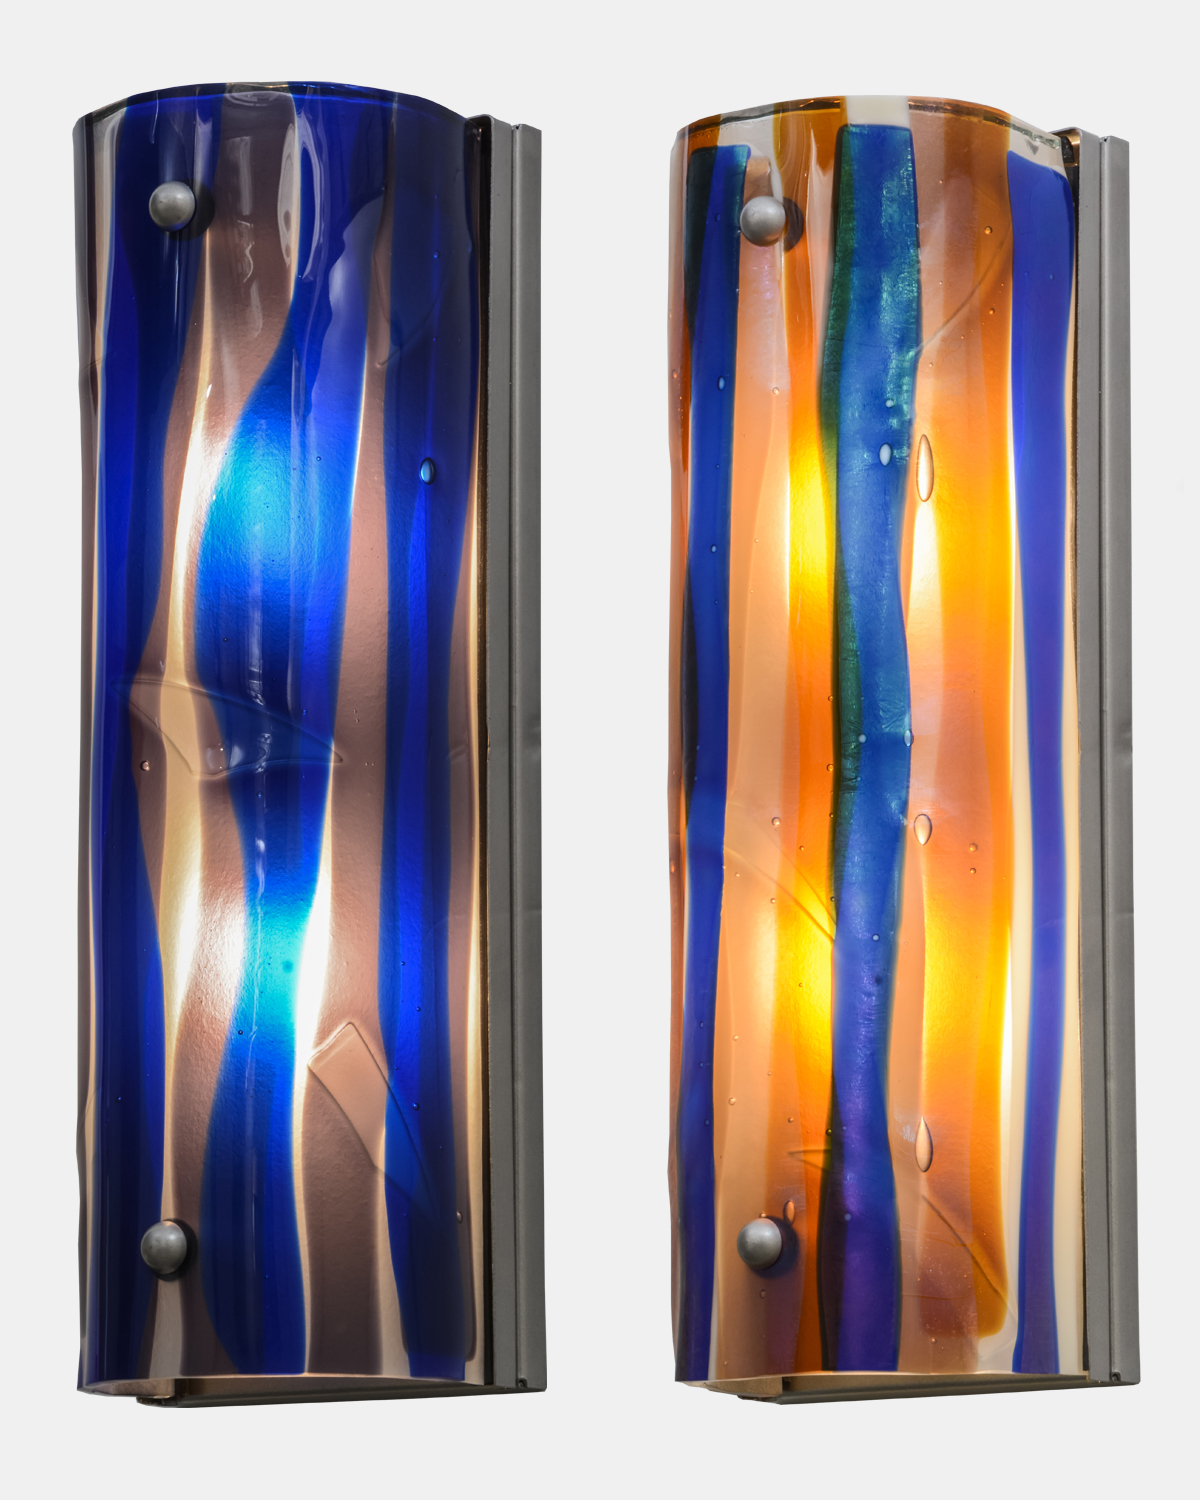 Meyda Custom Lighting introduces New Fused Glass Wall Sconces for Outdoor Applications